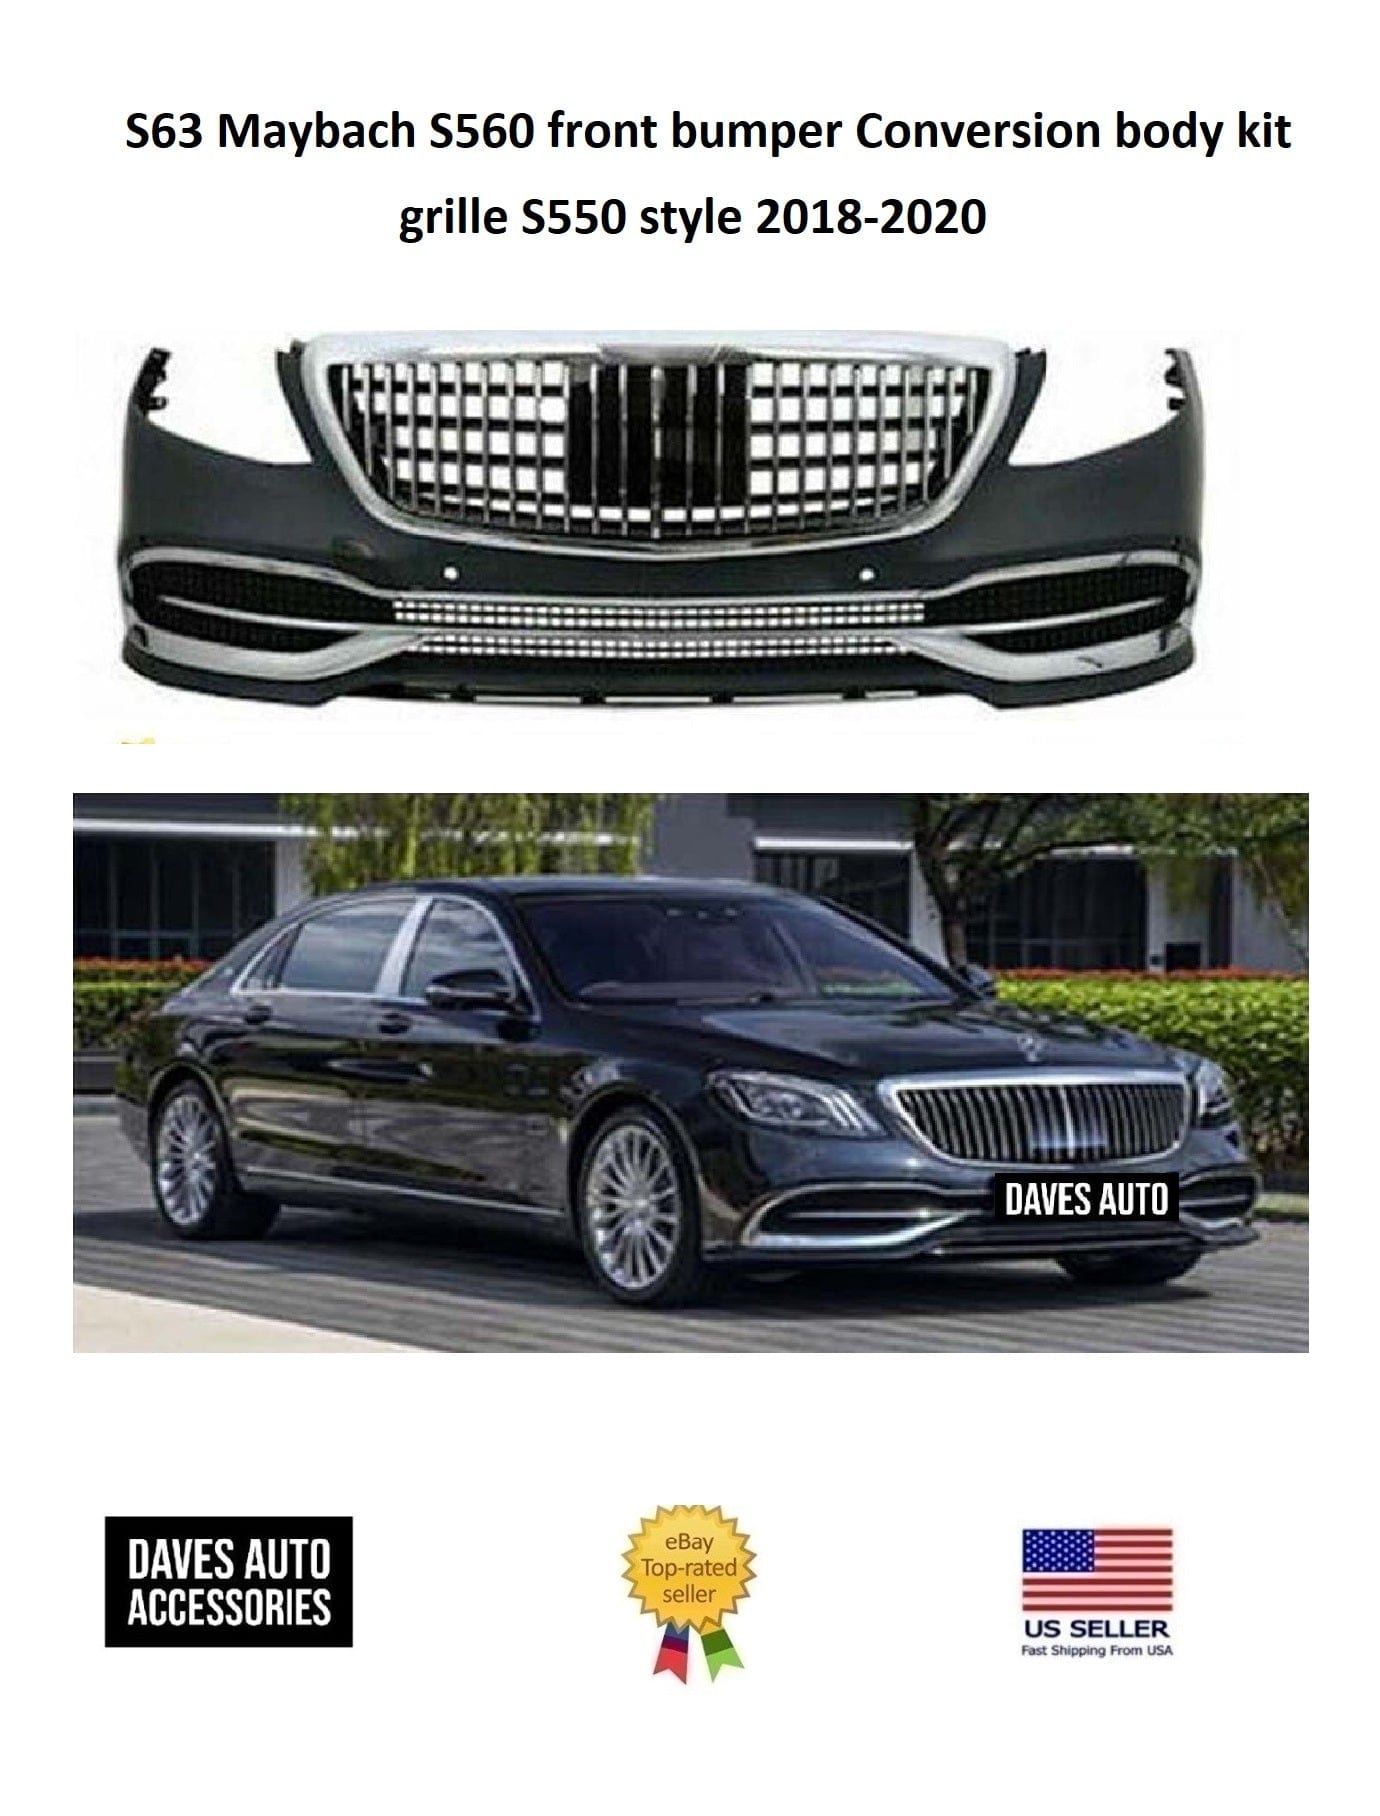 S63 Maybach S560 front bumper Conversion body kit grille S550 style 2018-2020